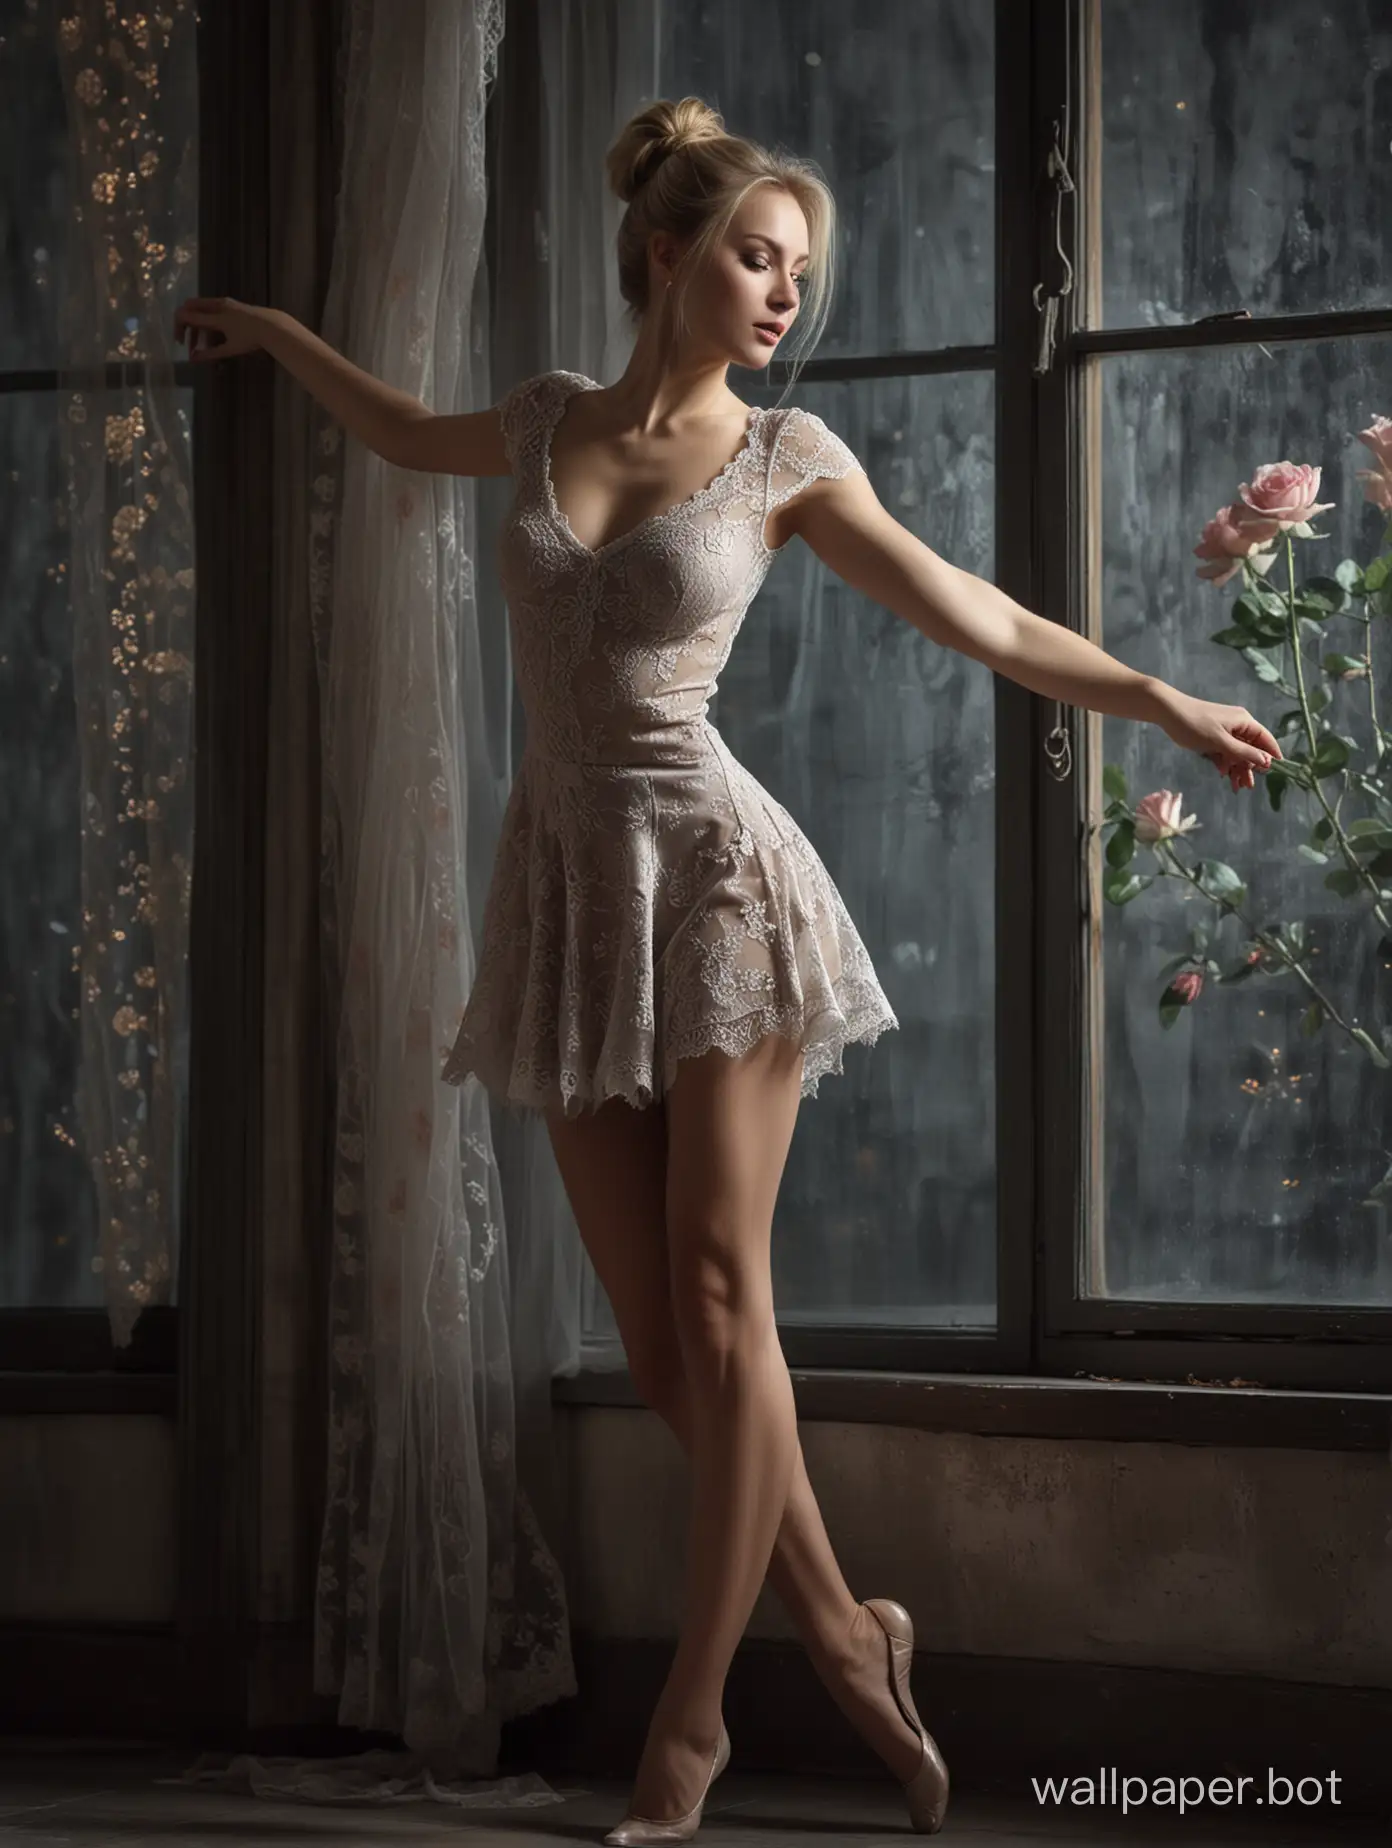 Delicate makeup, sexy blonde Russian beauty with ponytail, light eyes, slim body and medium breasts, with a beautiful gray lace dress with a short skirt and rose designs, dancing ballet with one raised leg, alone in the dark of night, with the moonlight Entering through a large window in the dark room, she illuminated her figure and her angelic face